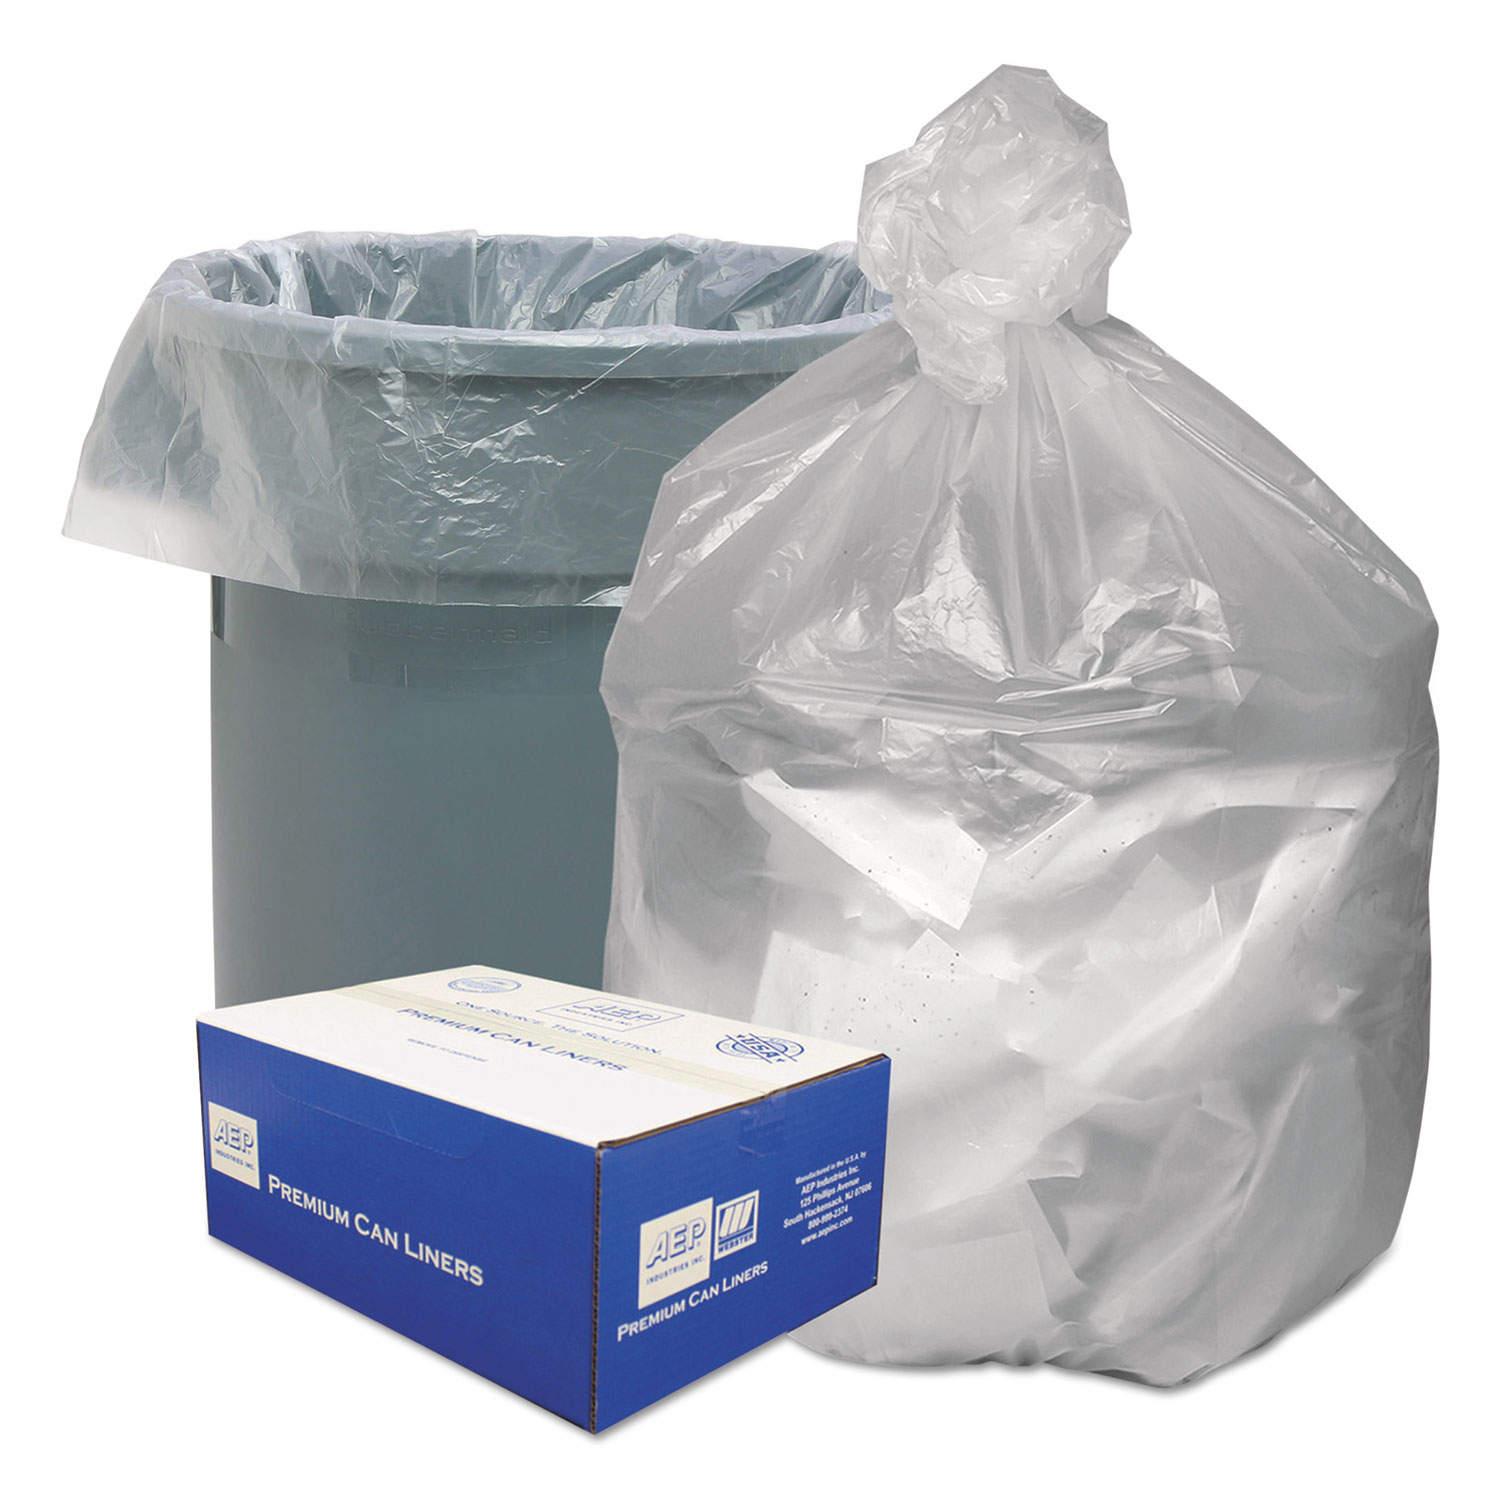  Good 'n Tuff GNT4348 Waste Can Liners, 56 gal, 14 microns, 43 x 46, Natural, 200/Carton (WBIGNT4348) 